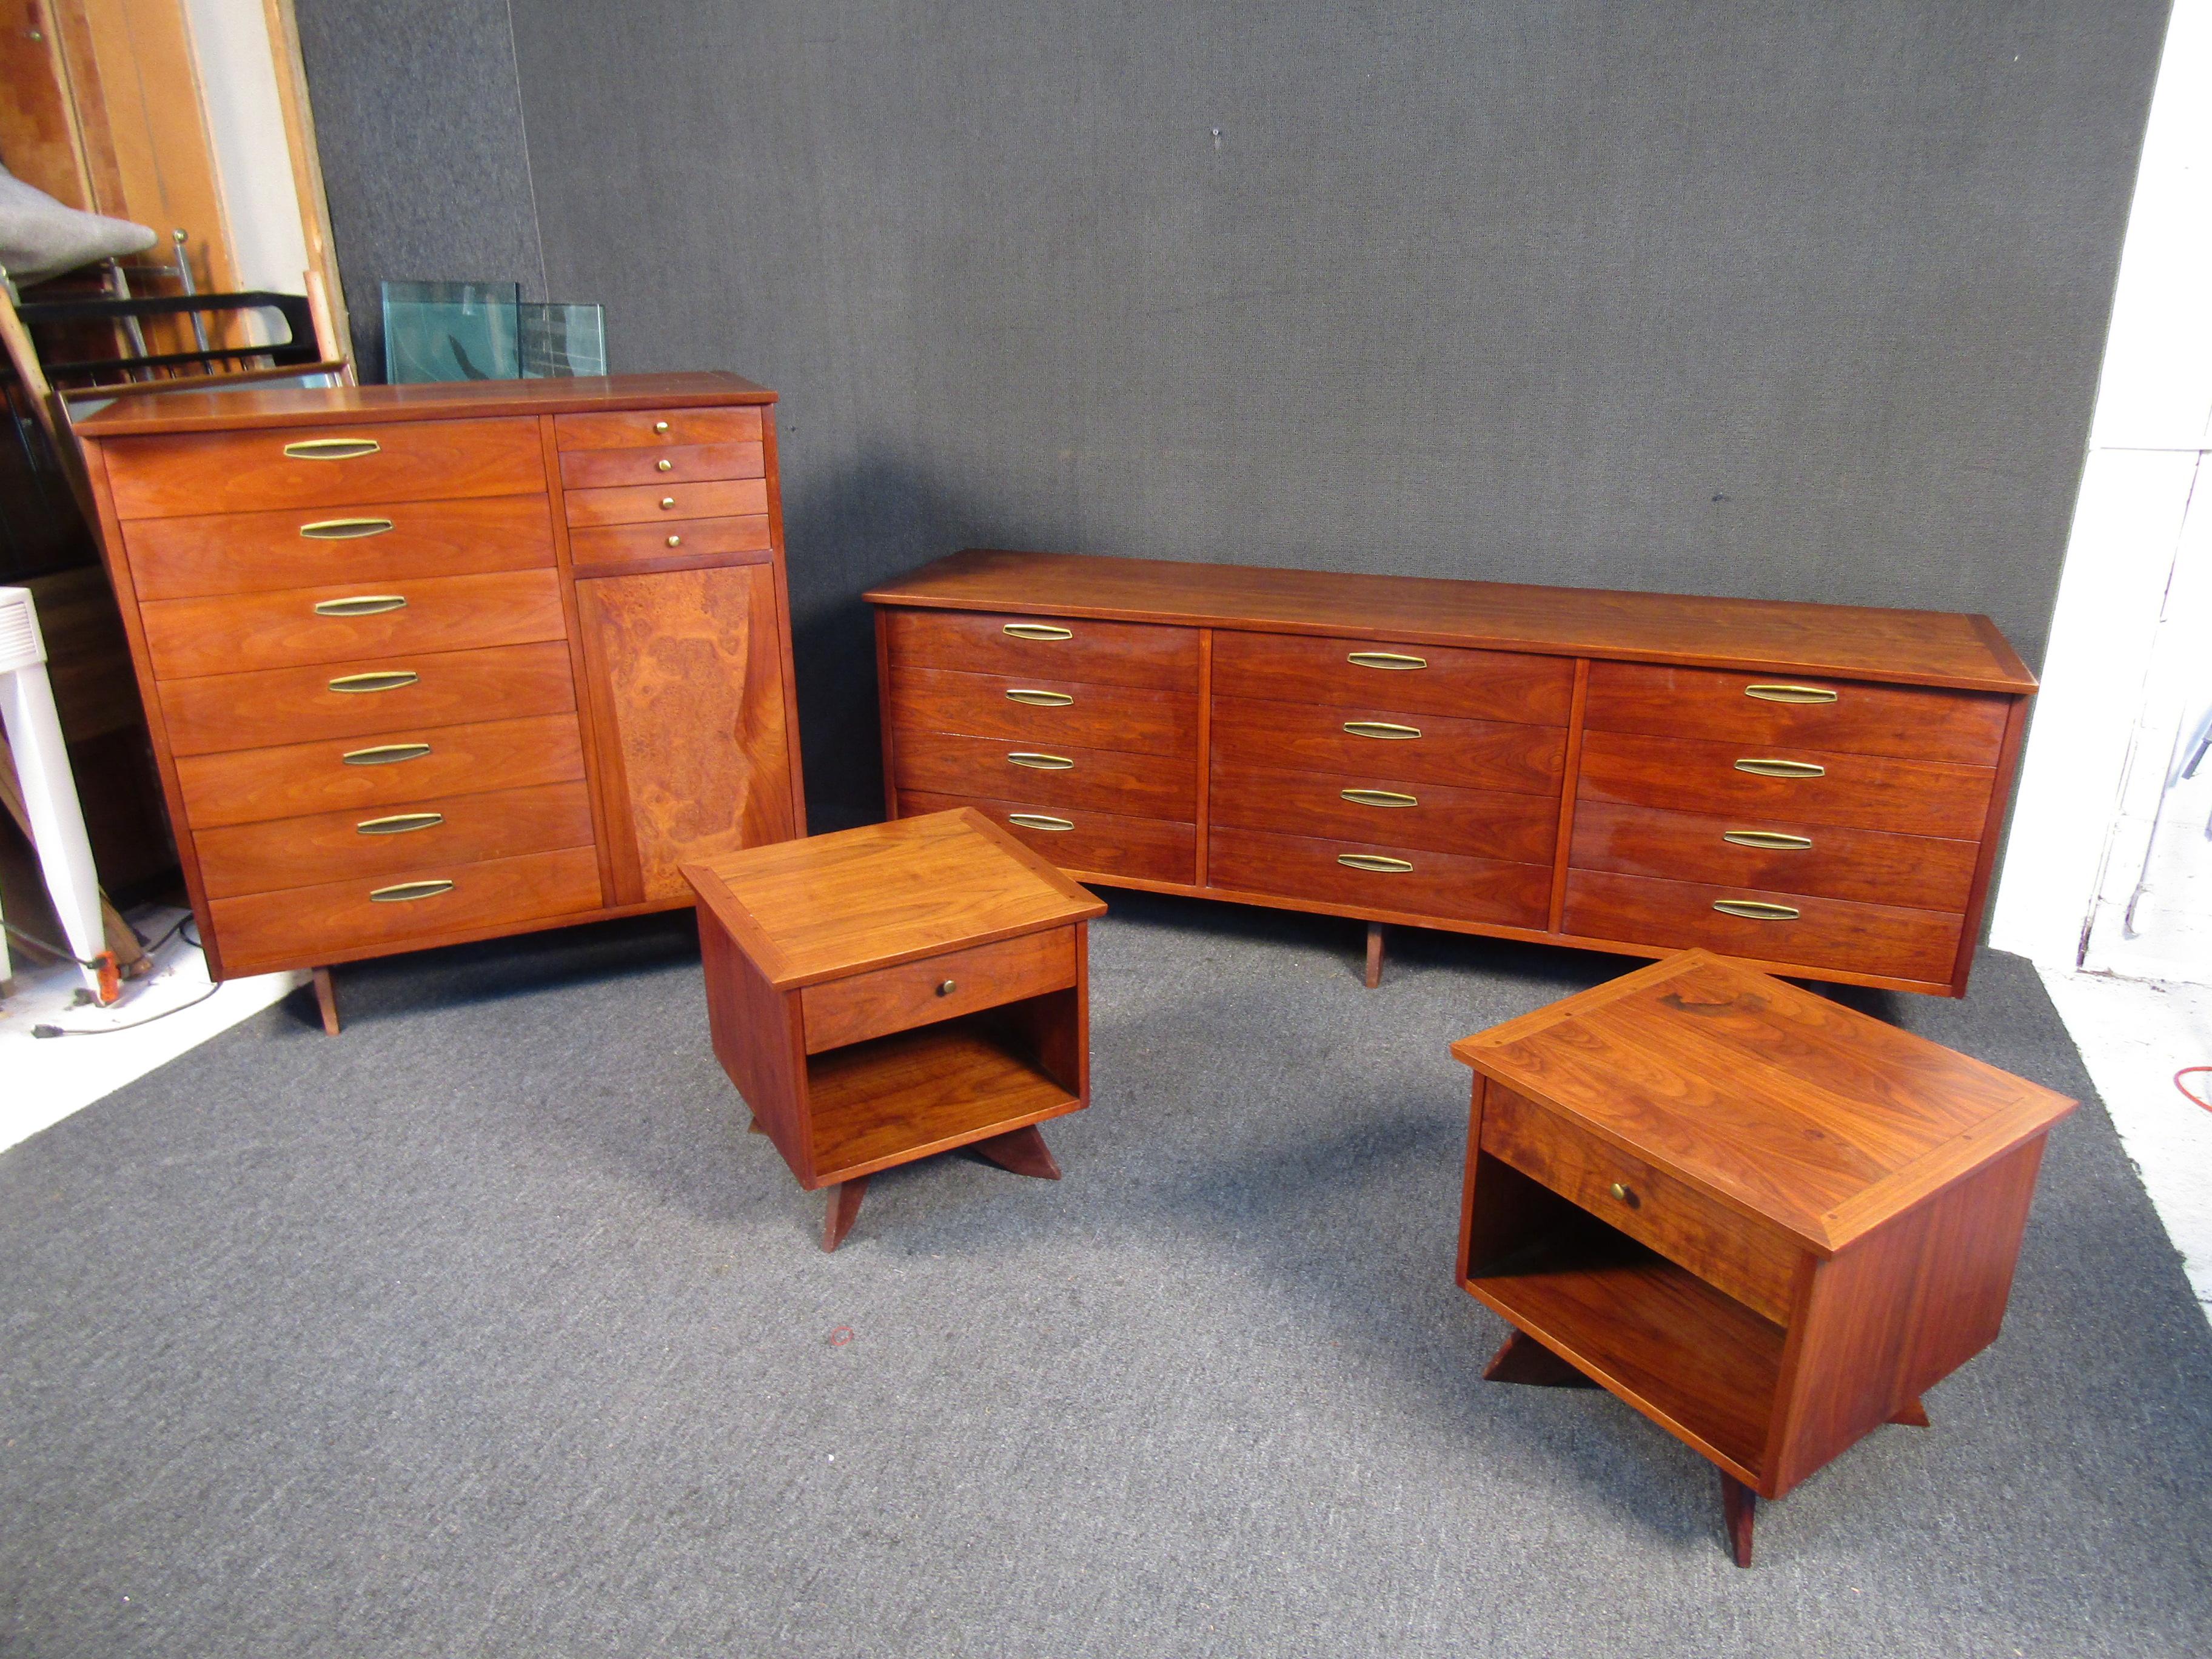 George Nakashima designed bedroom set for his Origins line by Widdicomb, Dramatic wood grain figuring throughout the body. Featuring a highboy, rare example with a figured burl door and drawers for every necessity rising on a splayed base.